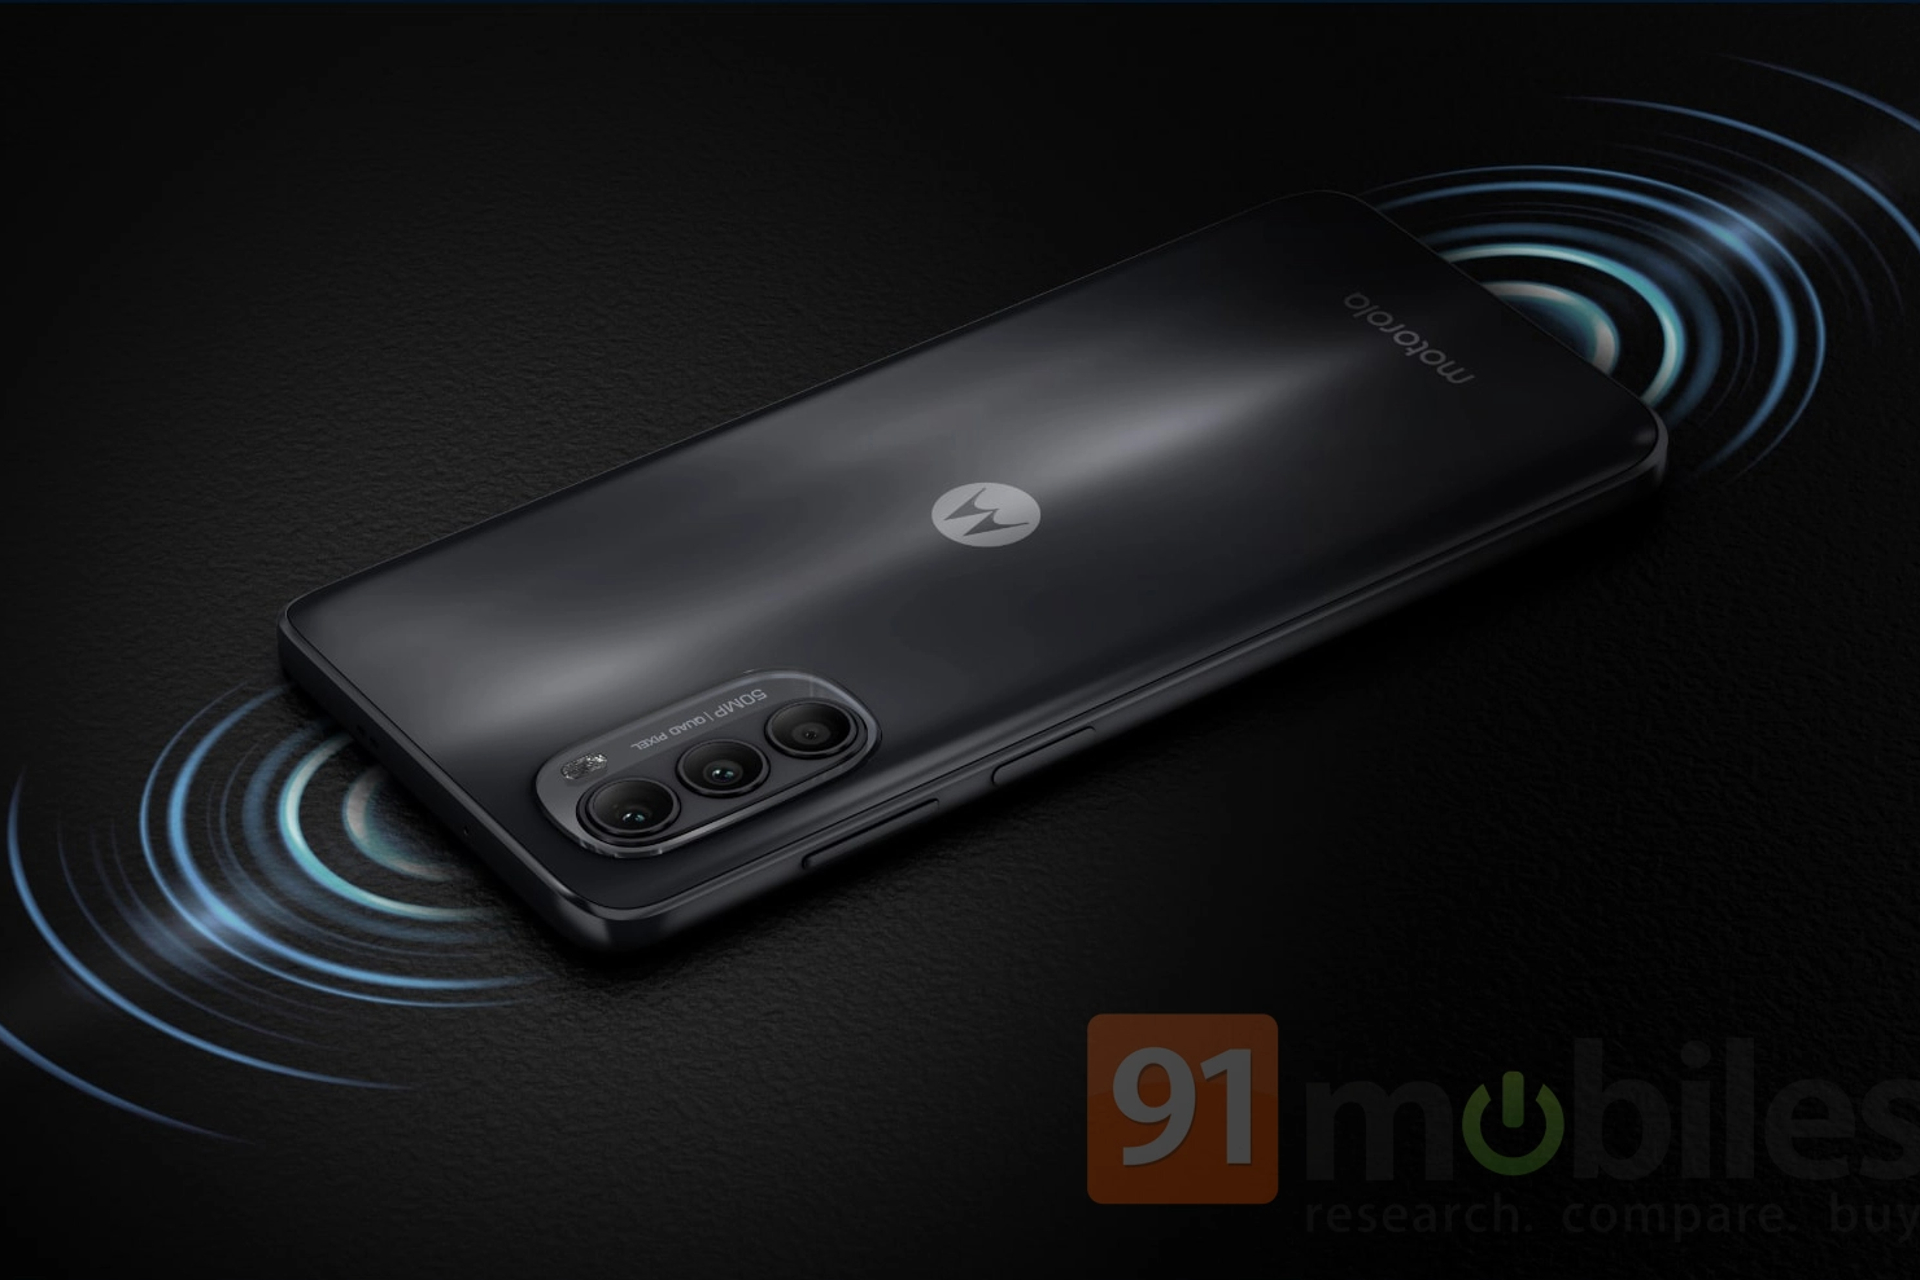 Moto G52 tipped to launch with the Snapdragon 680 chipset